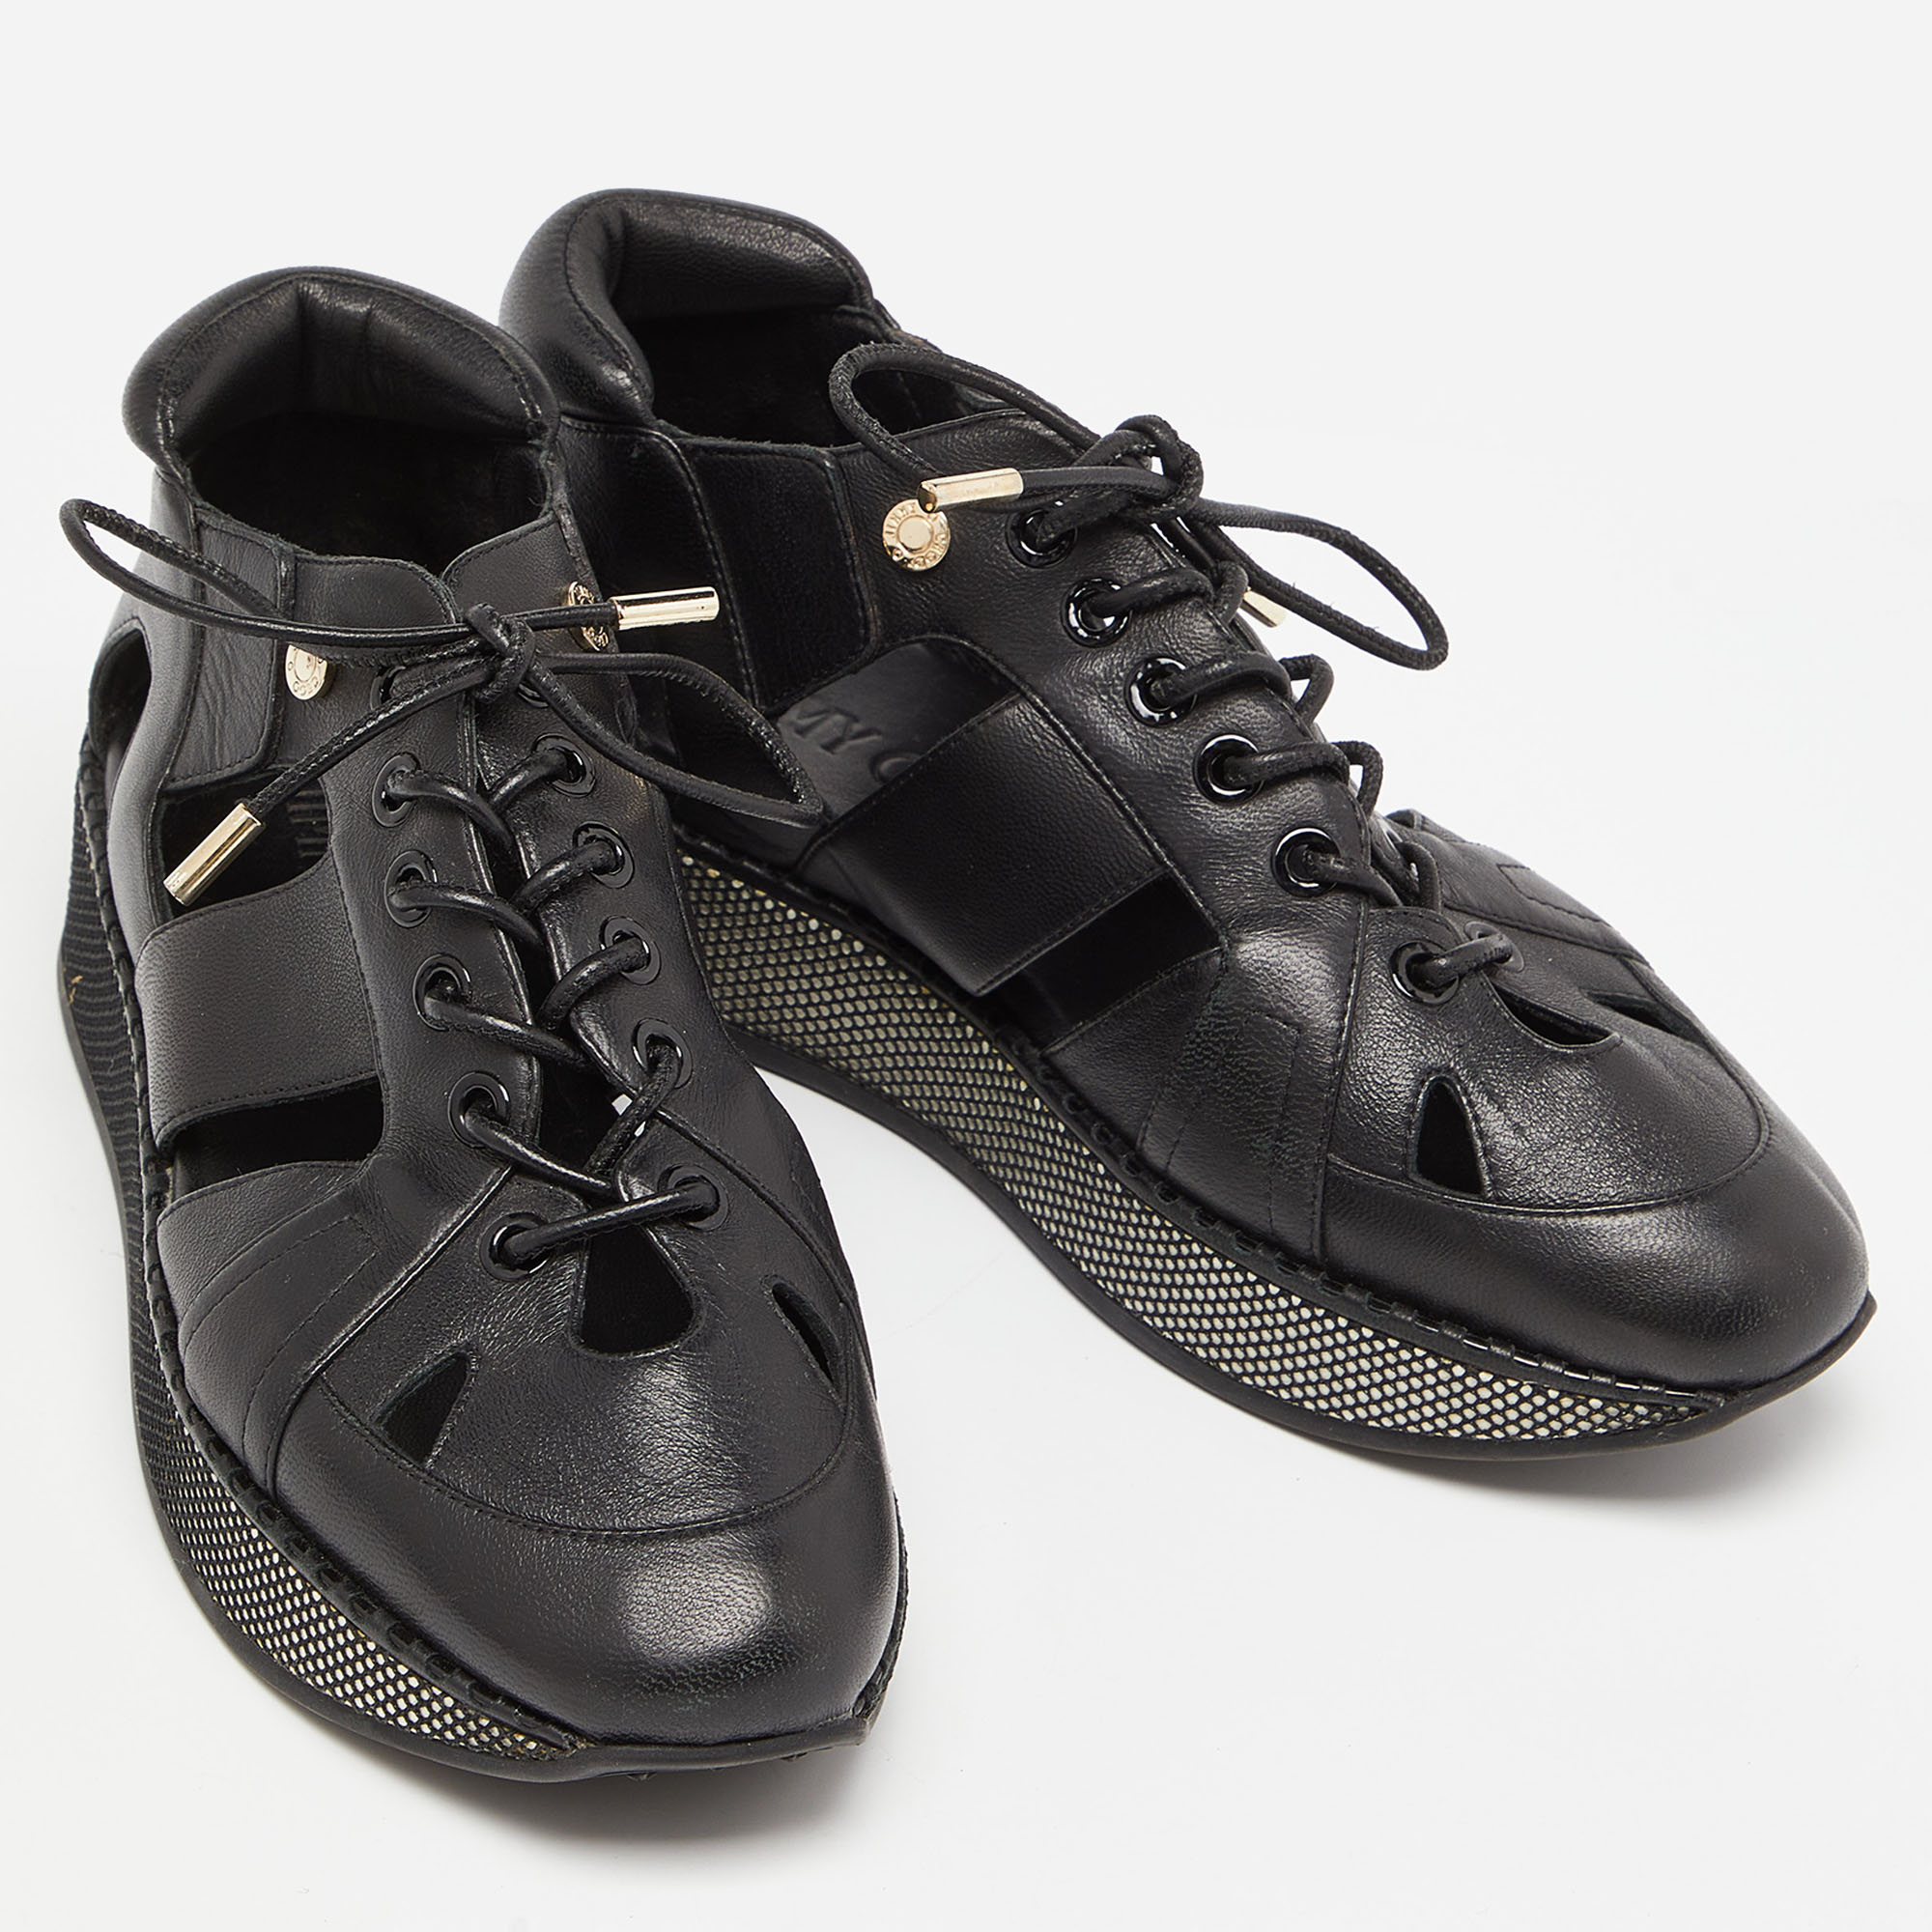 Jimmy Choo Black Cut Out Leather Morton Sneakers Size 36